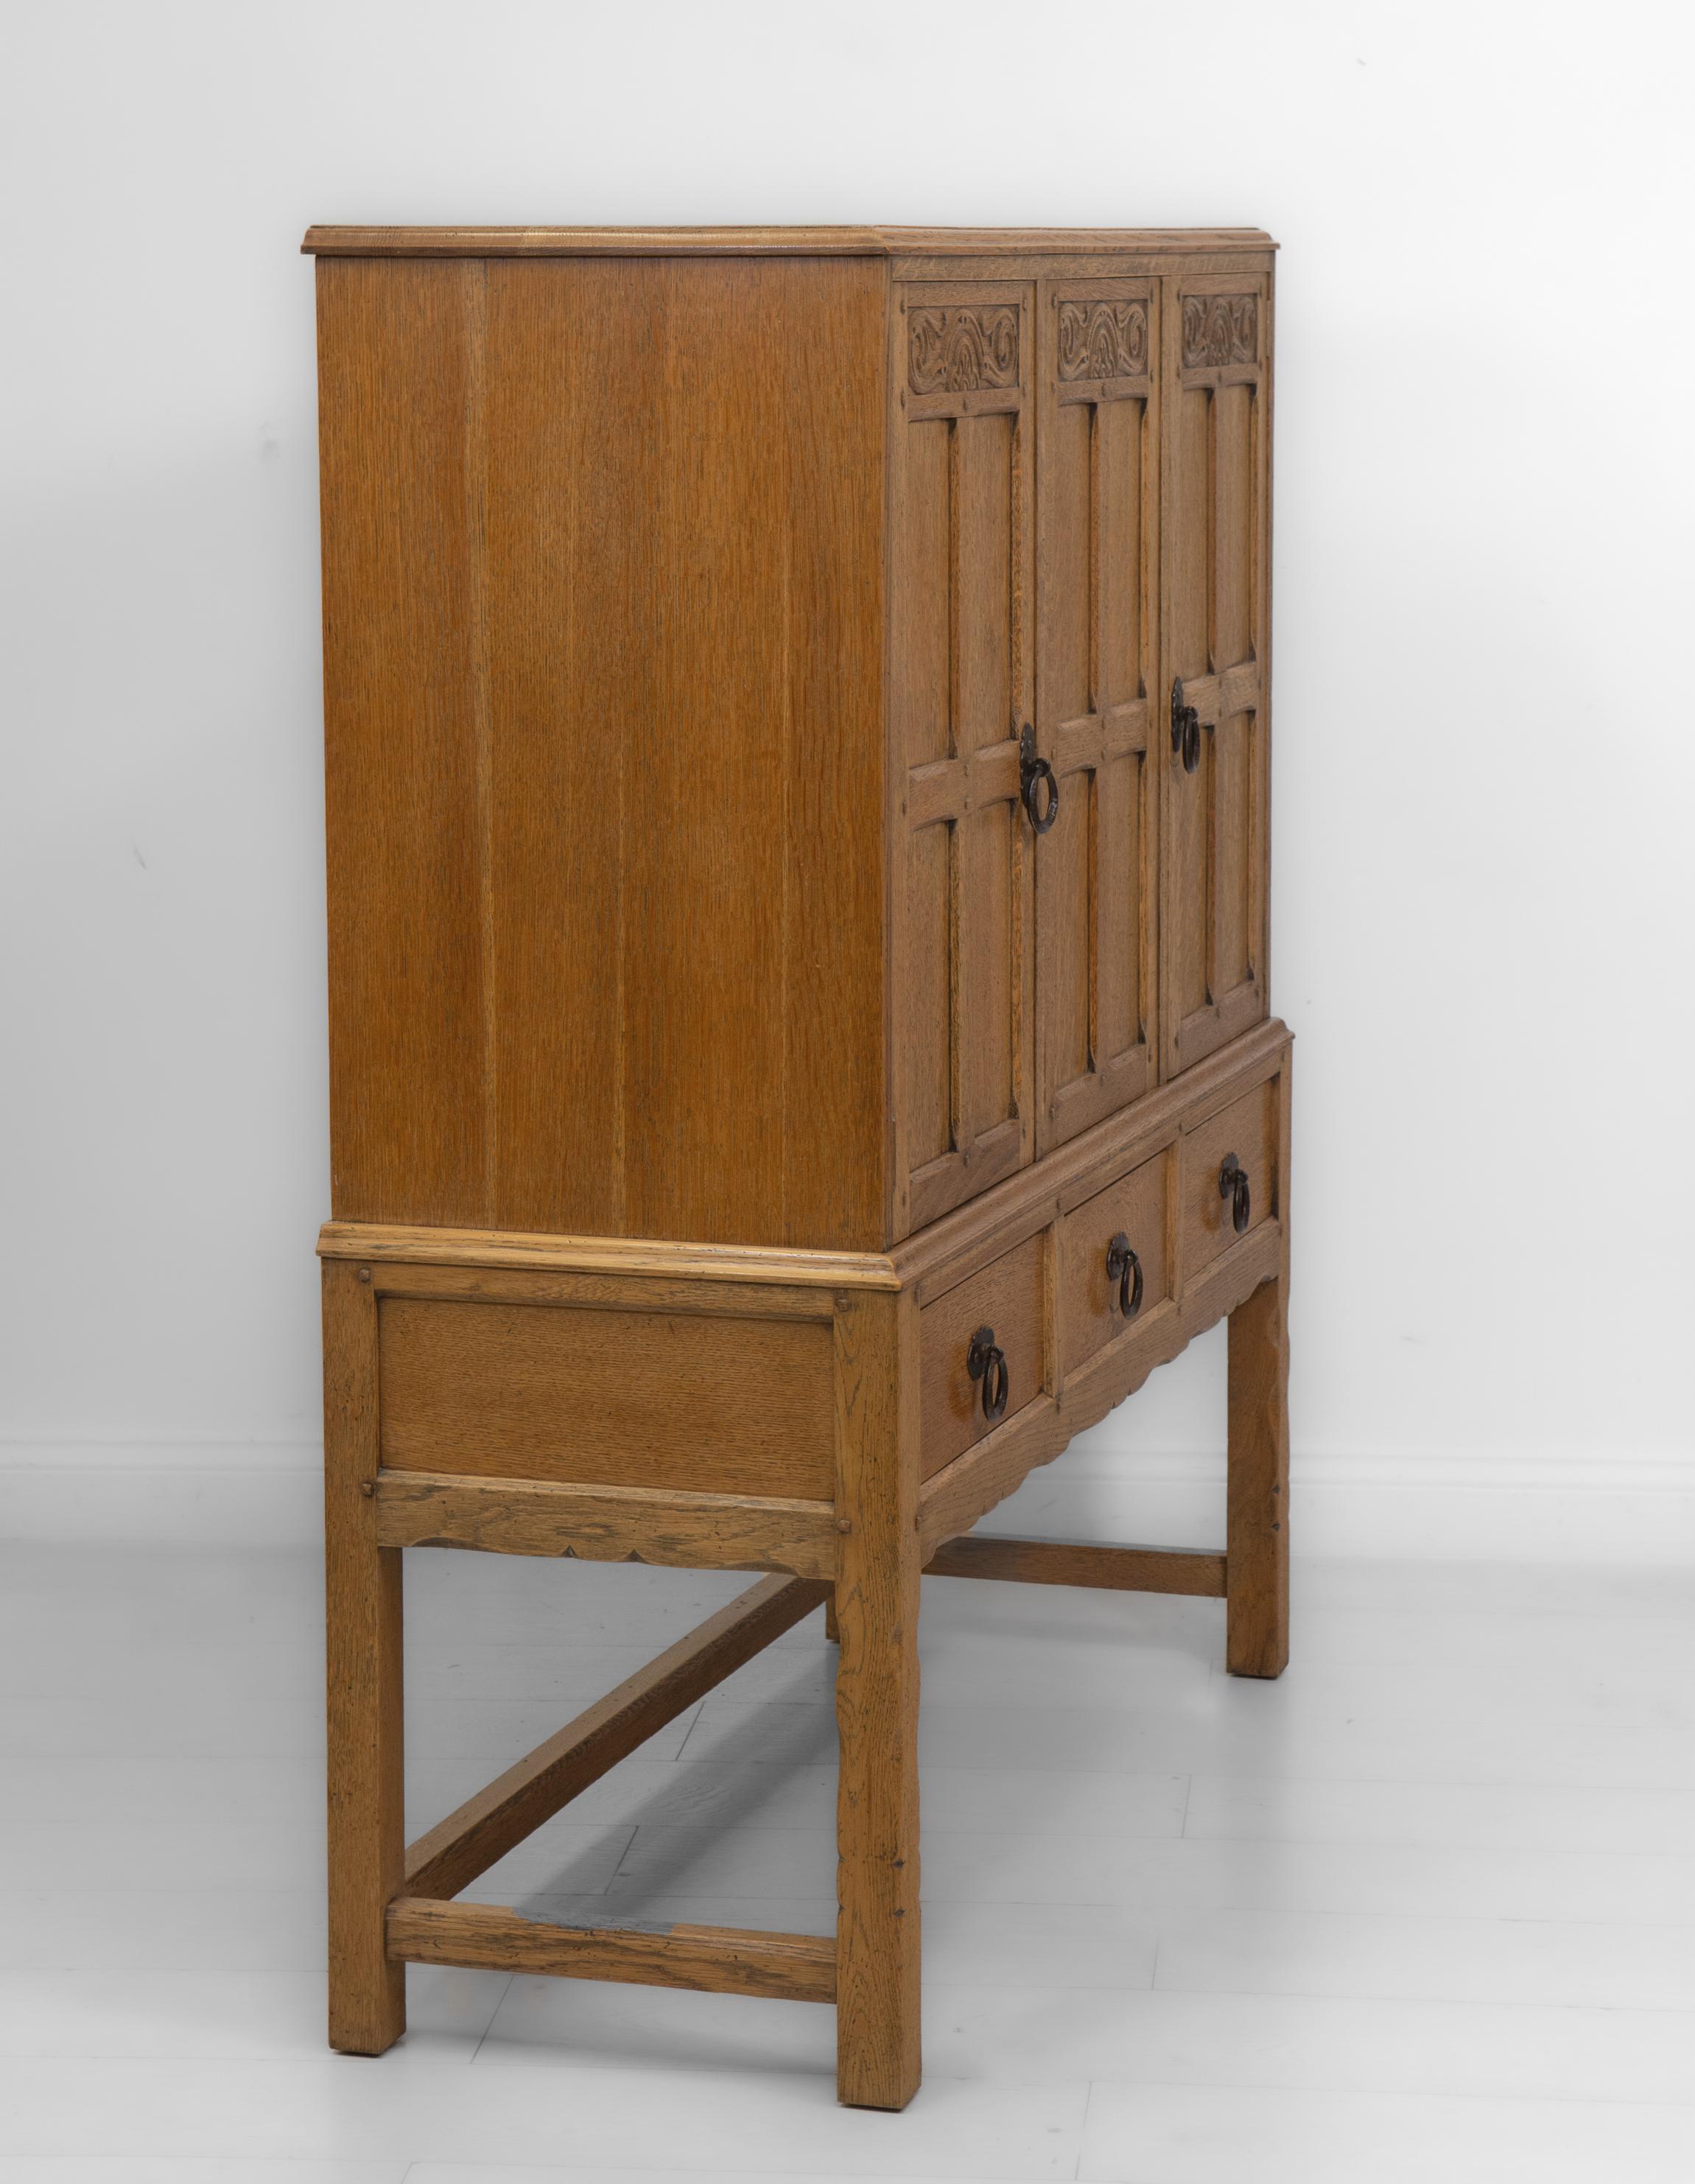 Waring & Gillow Oak Cotswold School Manner Arts And Crafts Cabinet Circa 1920 For Sale 3